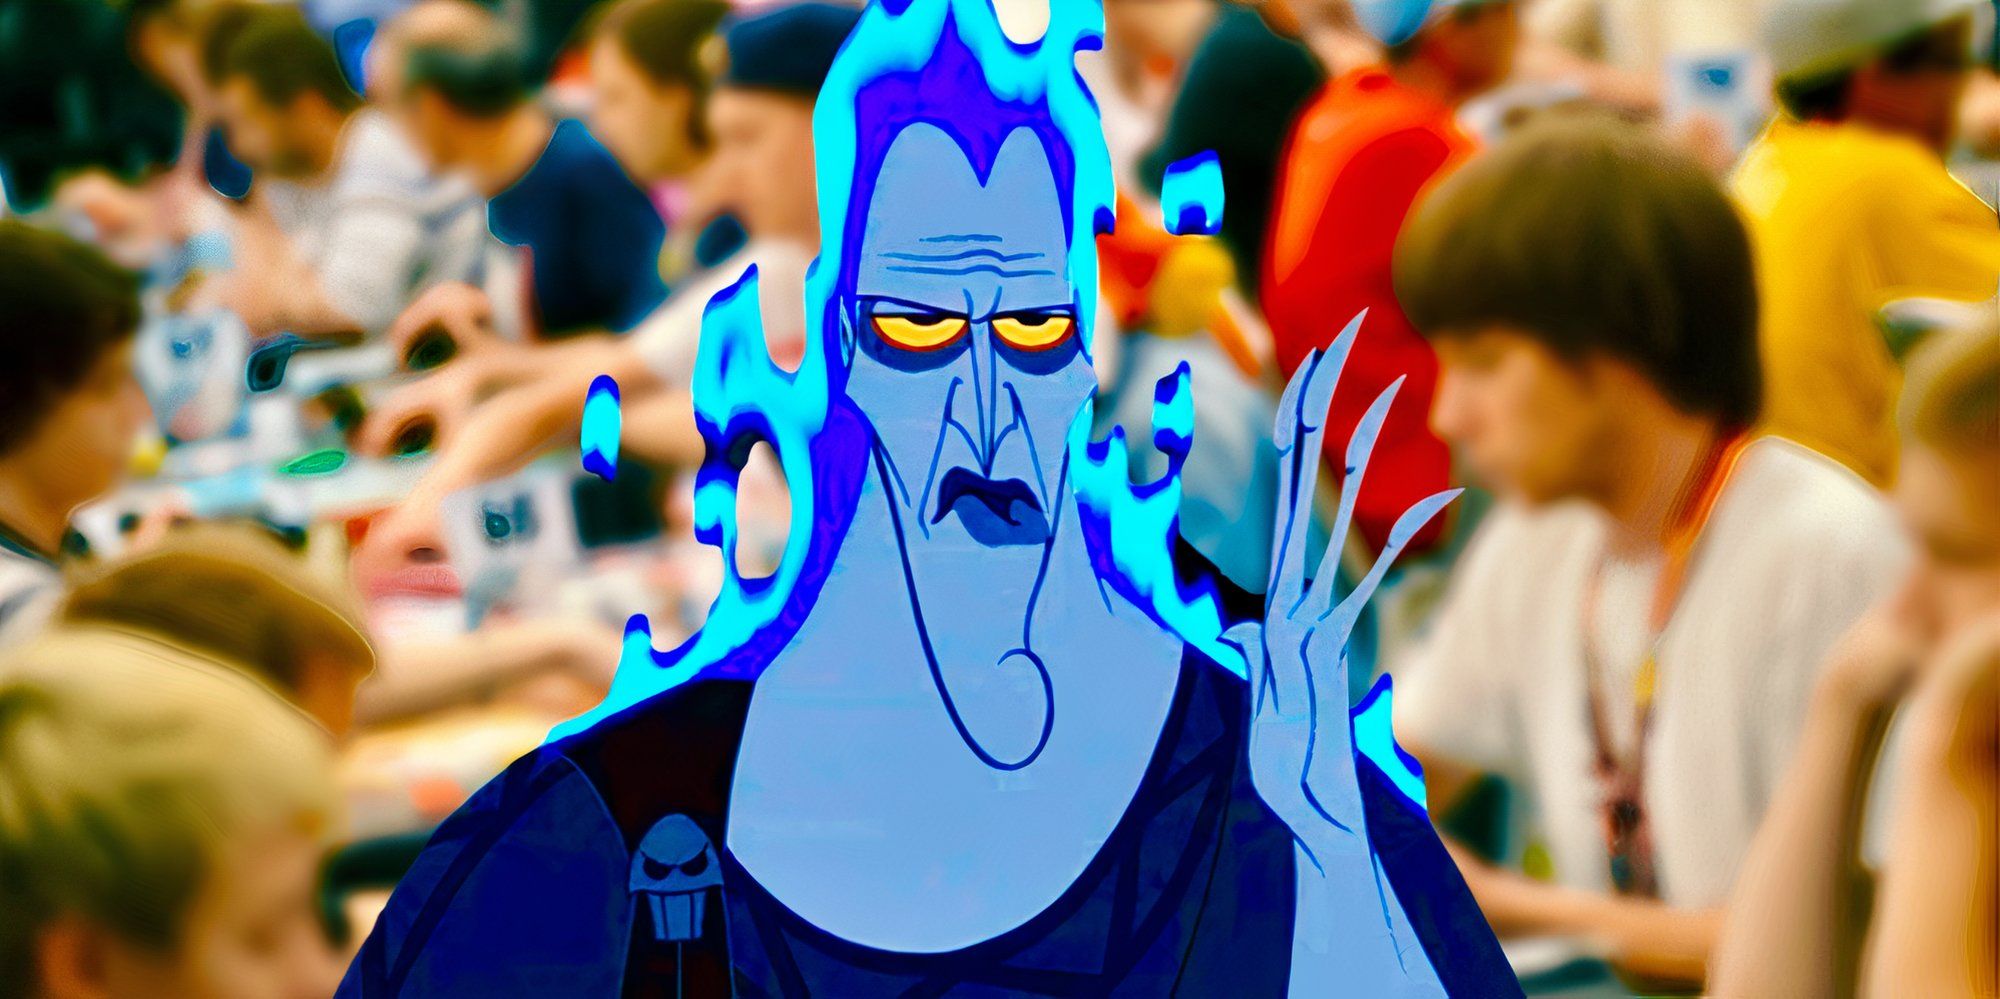 Hades from the Disney Hercules movie looking mad, atop a blurred background of TCG players.